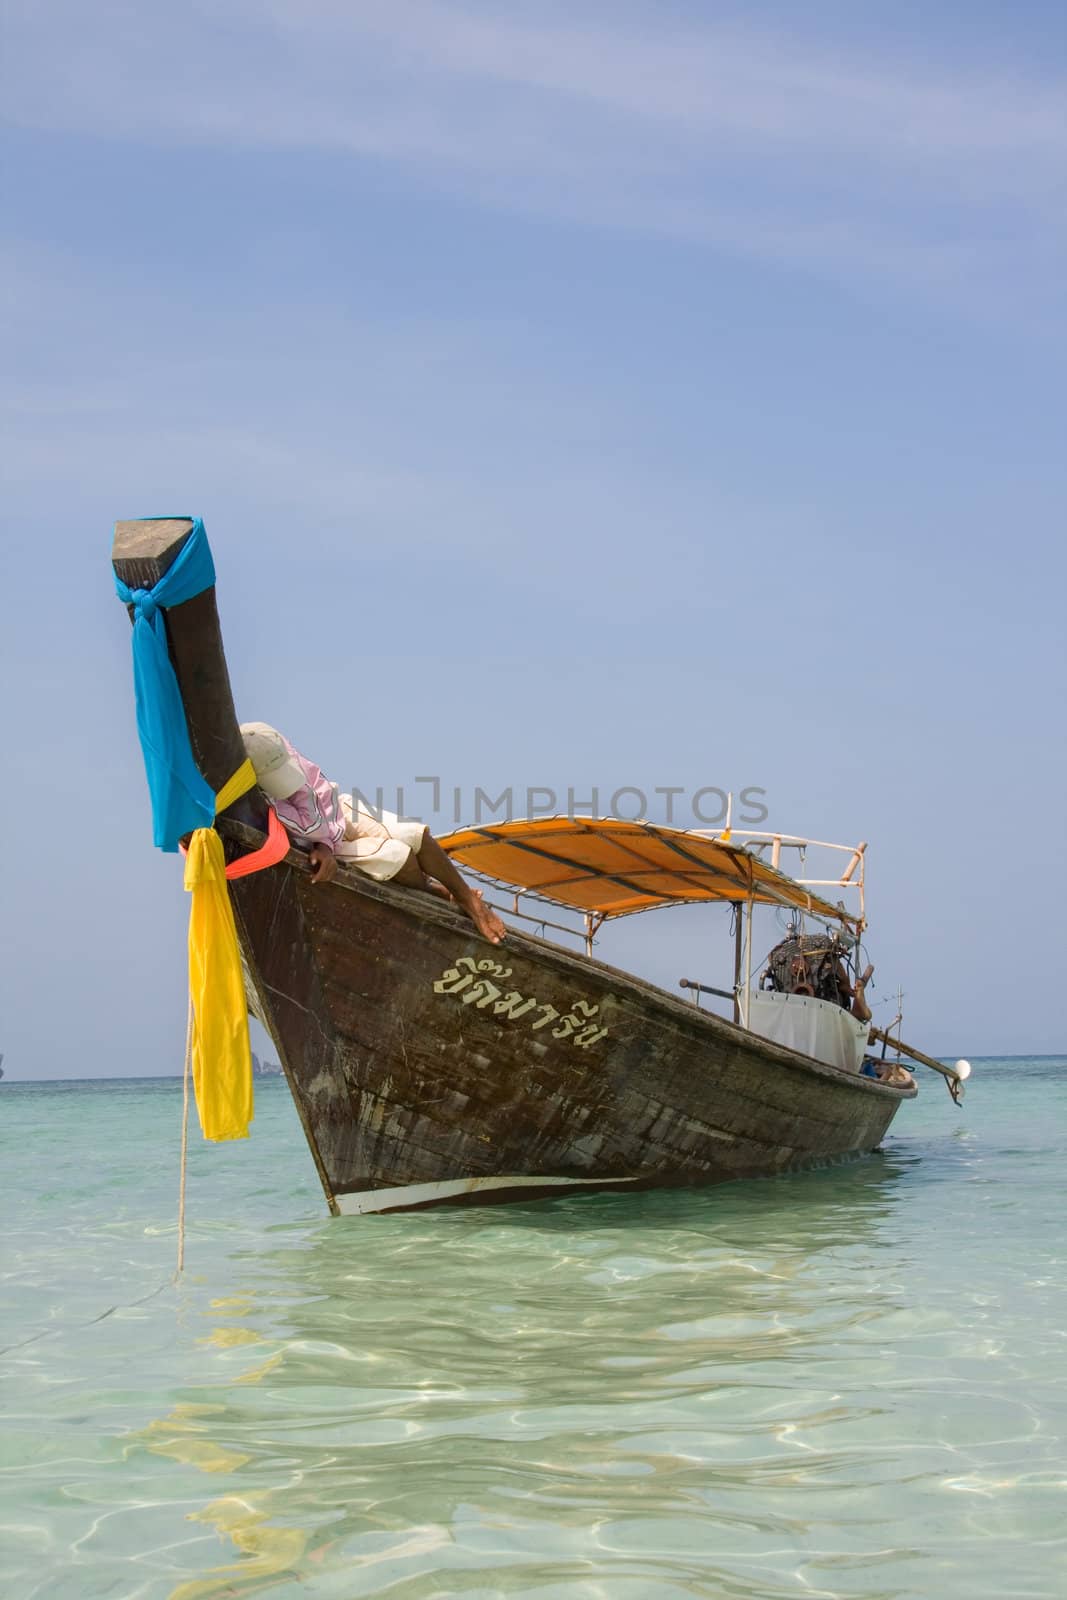 Longtailboat at the beach  by kjorgen